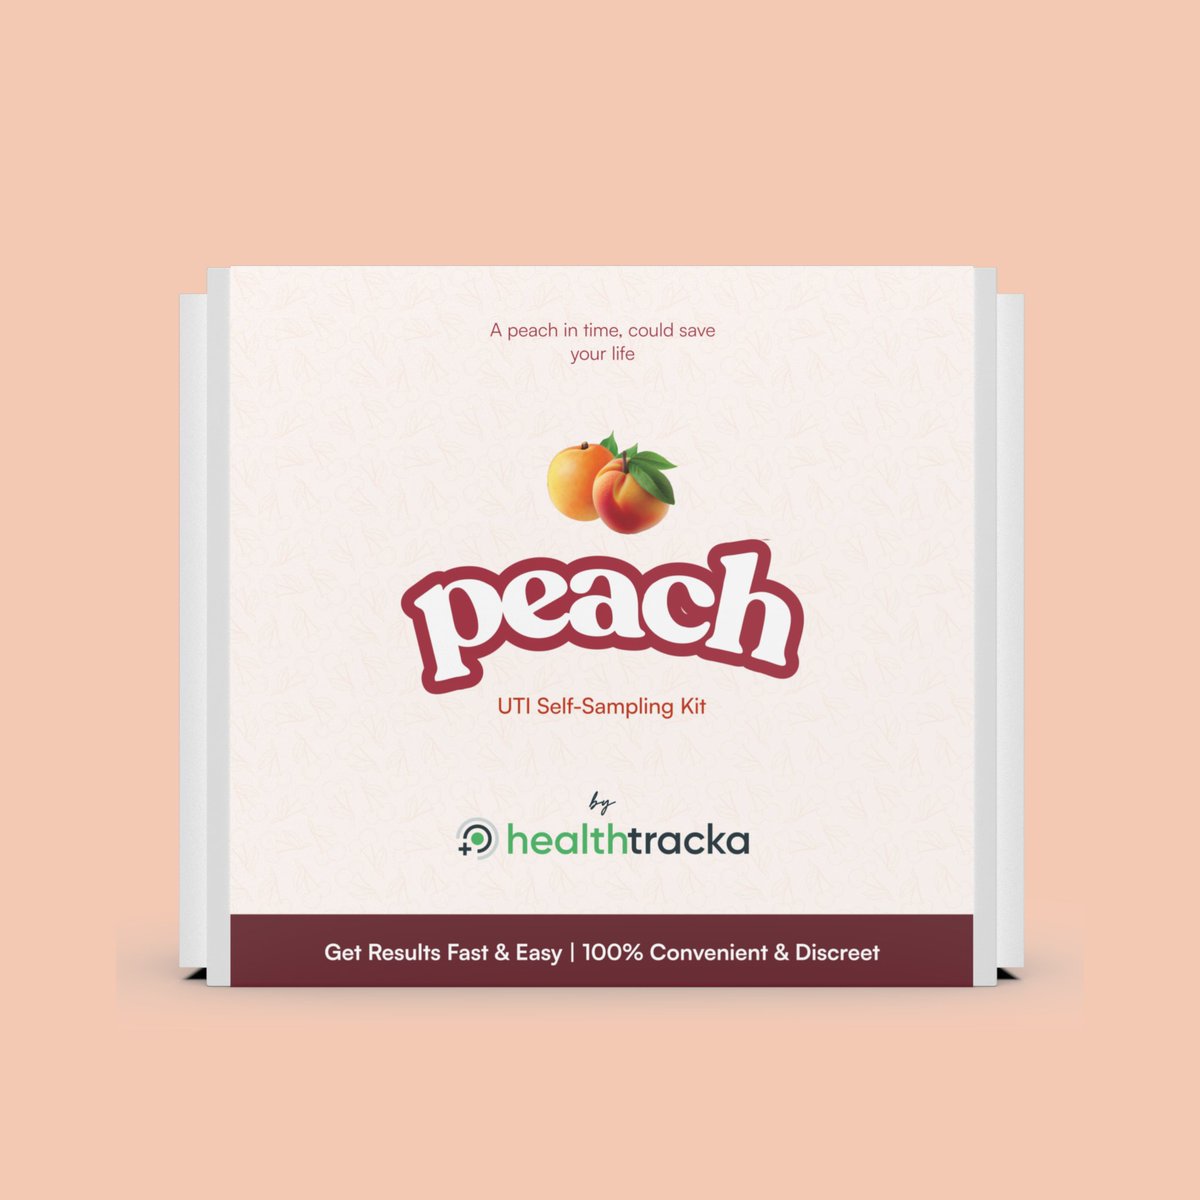 One of the best innovations of 2023 is definitely the PEACH KIT by Healthtracka @healthtracka for UTI ( Urinary Tract infection) Imagine having symptoms like pain during urination, pain in the Pelvic area, change in urine colour , smelly urine, and more urine symptoms Being